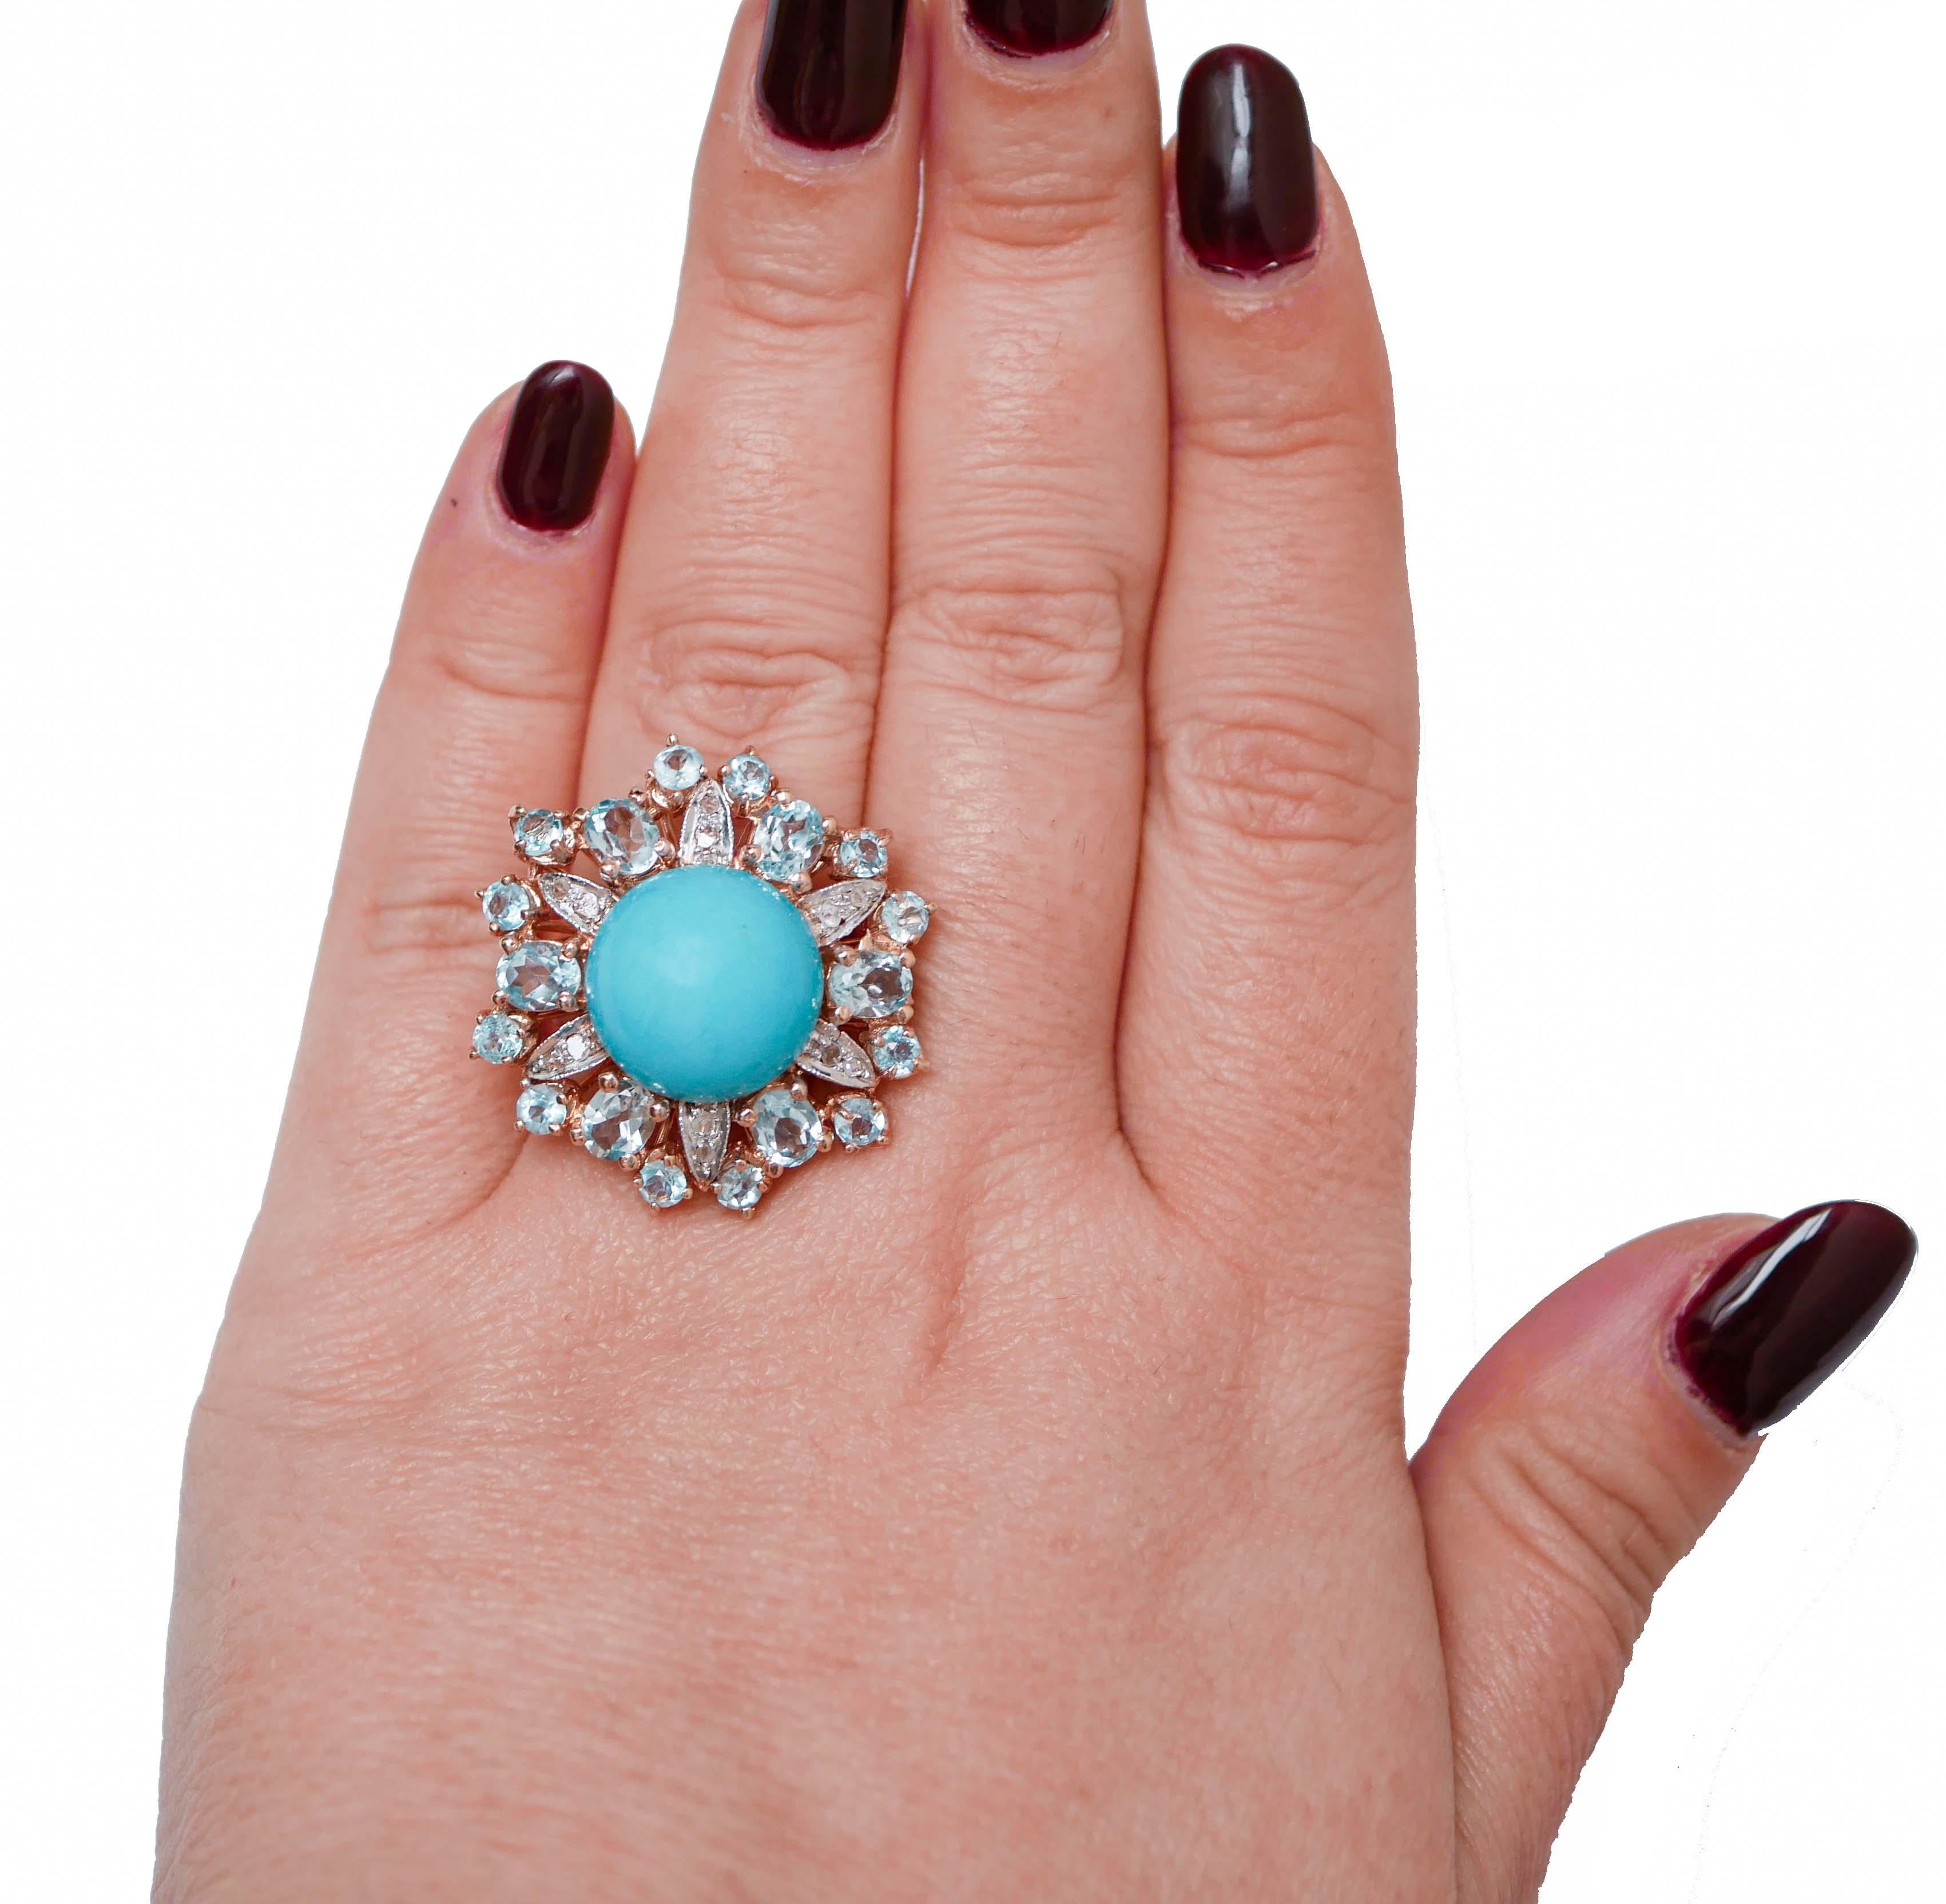 Mixed Cut Aquamarine Colour Topazs, Magnesite, Diamonds, Rose Gold and Silver Ring. For Sale